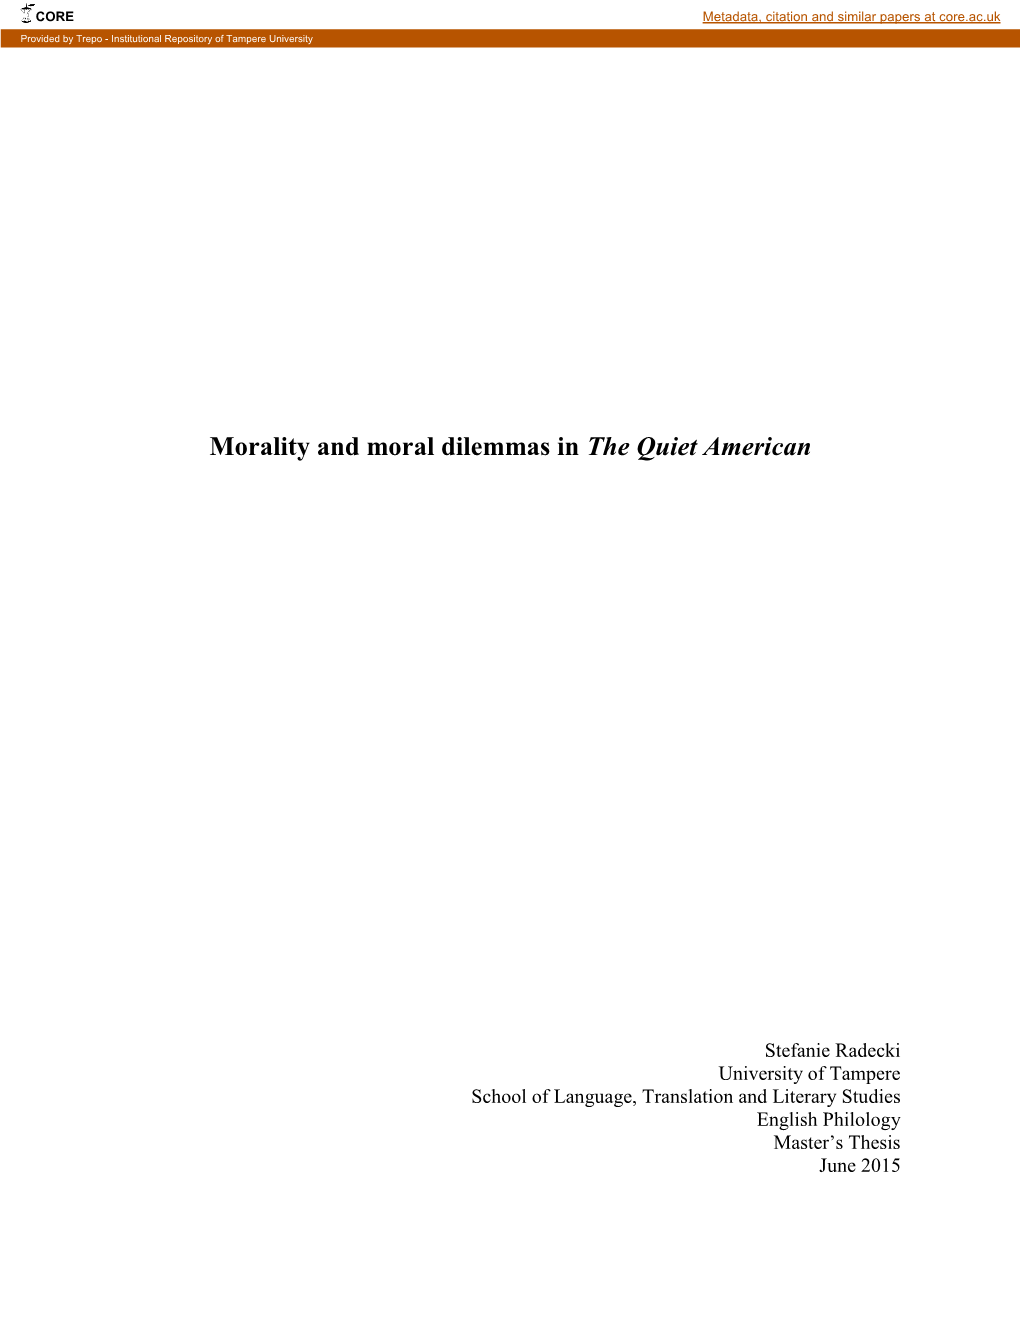 Morality and Moral Dilemmas in the Quiet American